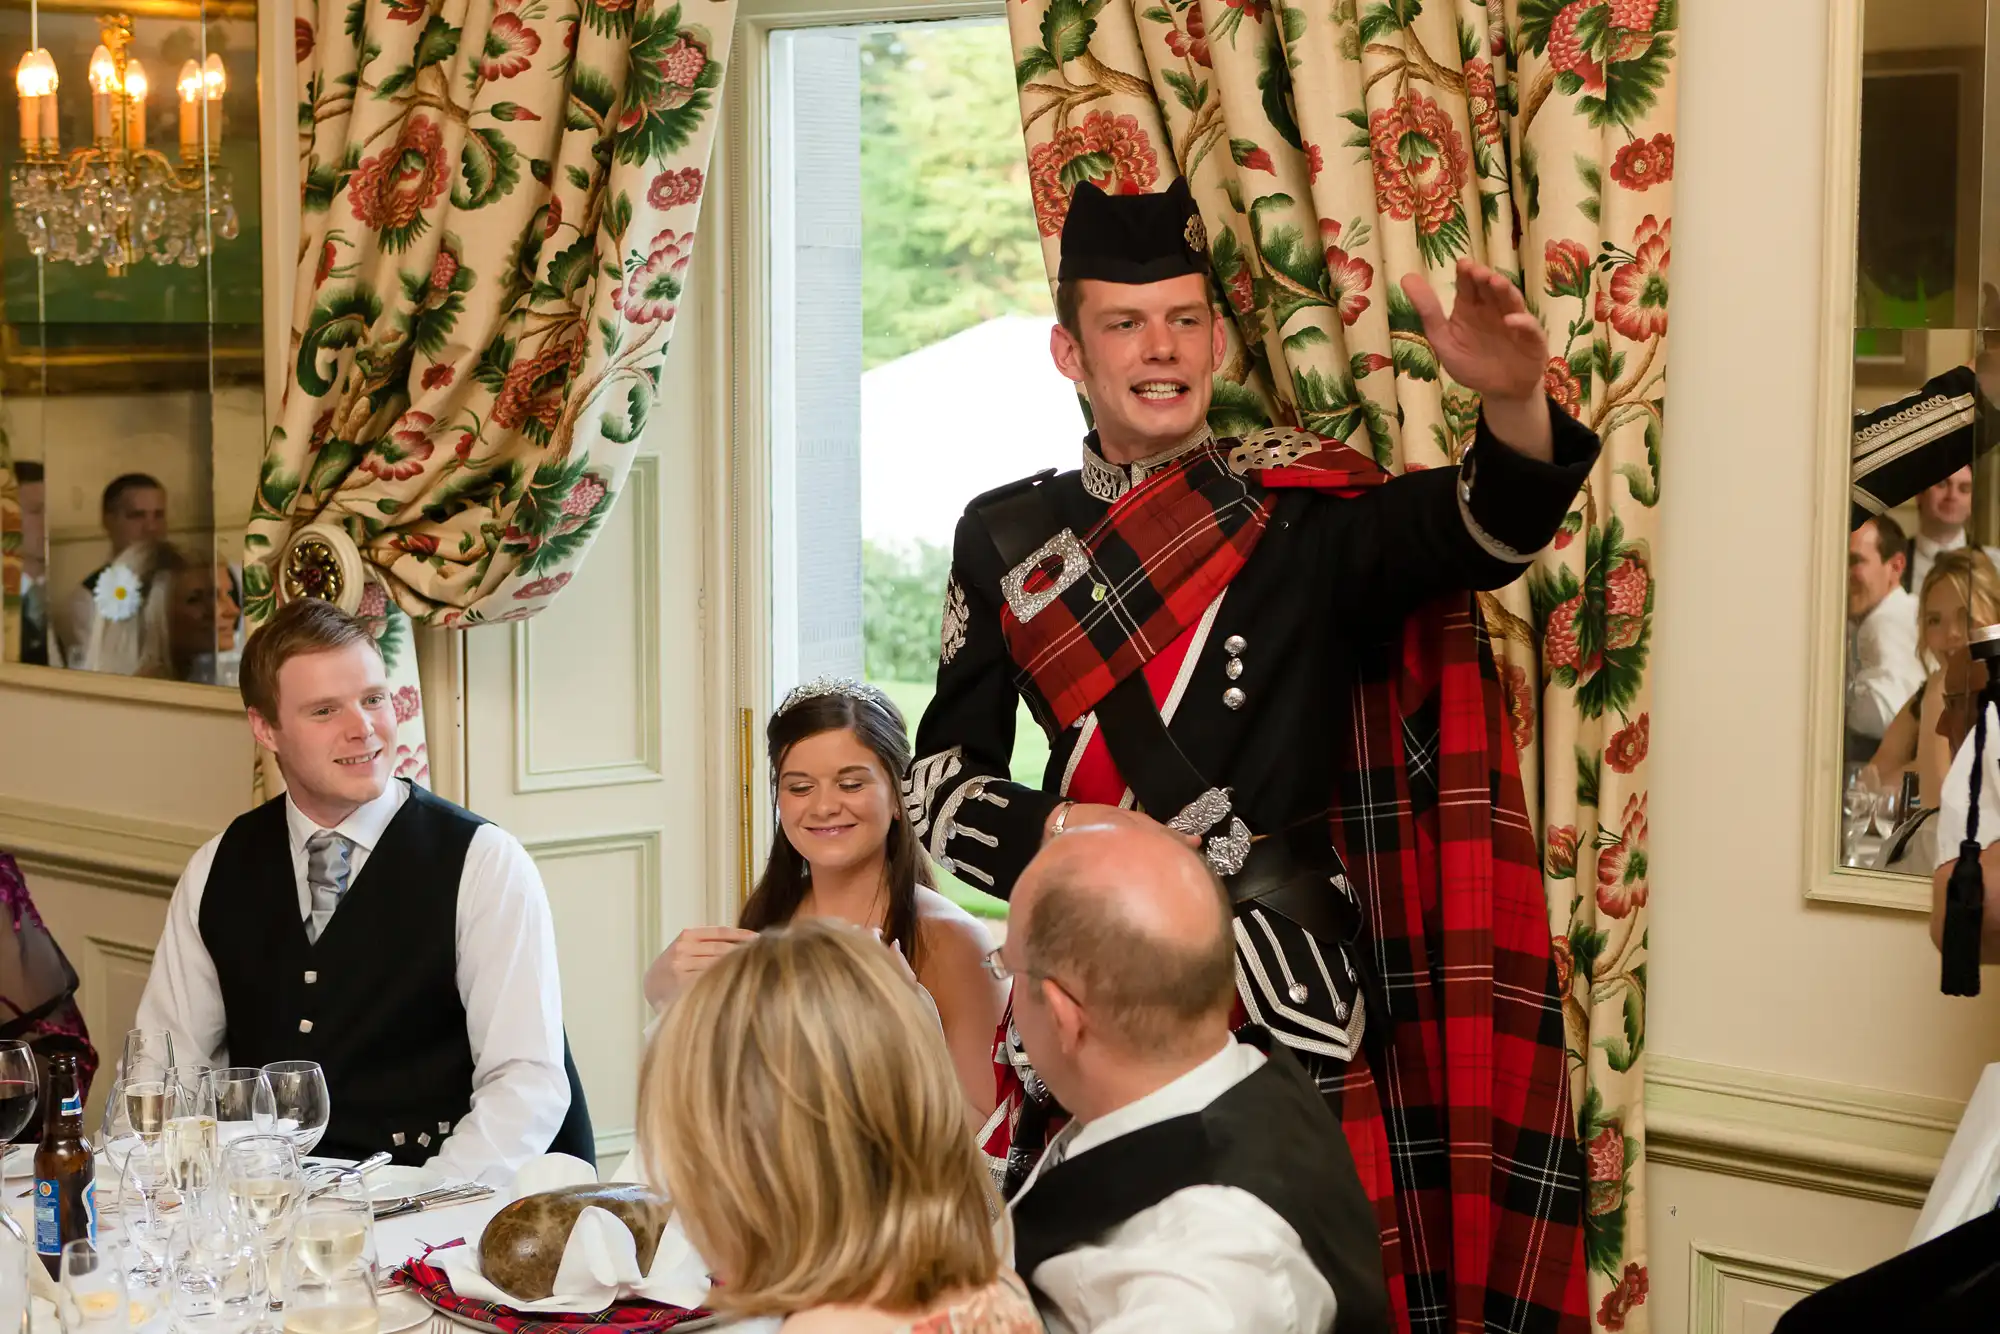 A man in traditional scottish attire addressing guests at a formal dining event, with others seated around him listening.